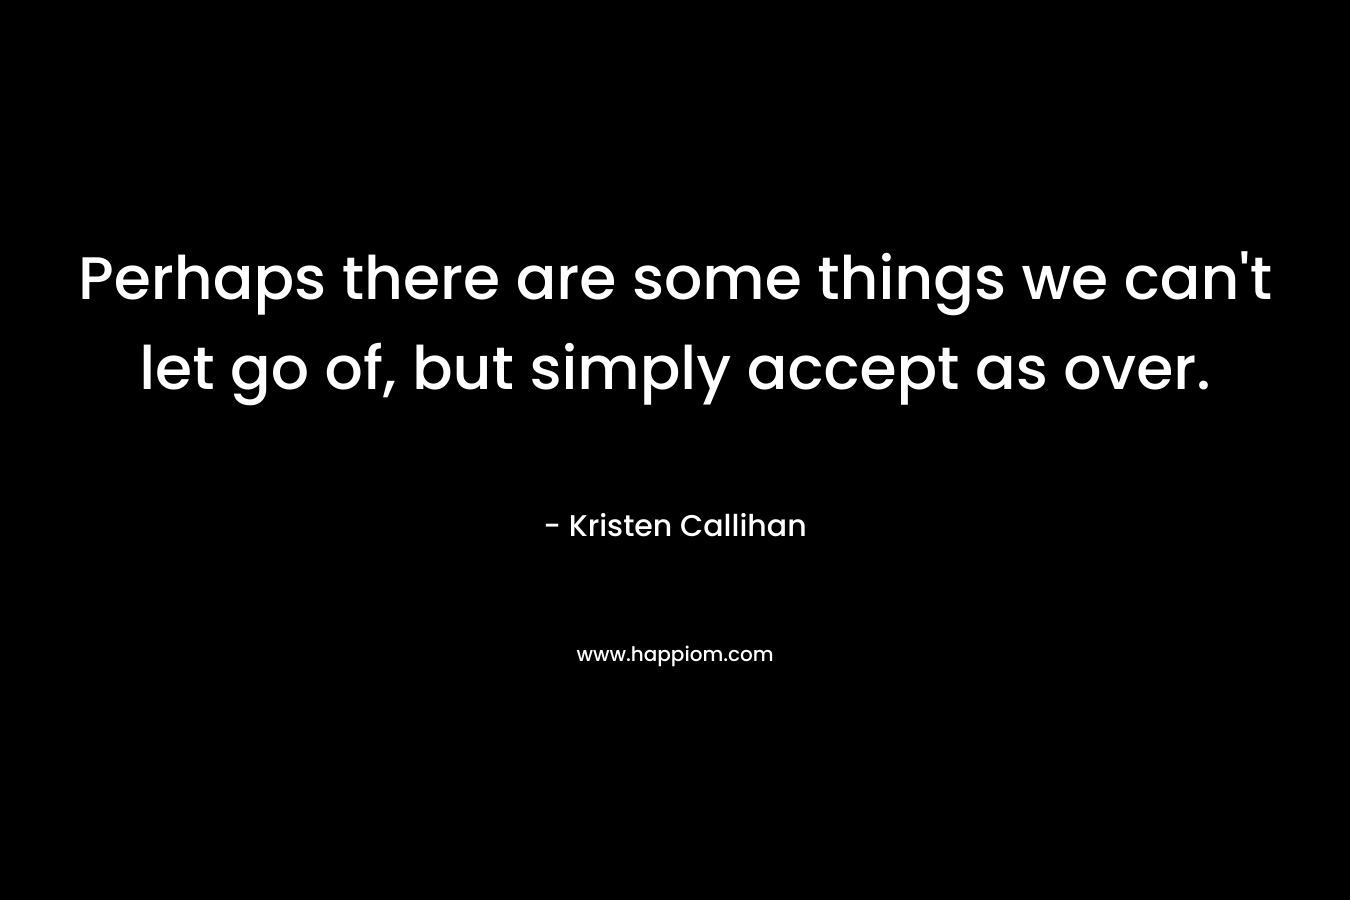 Perhaps there are some things we can’t let go of, but simply accept as over. – Kristen Callihan